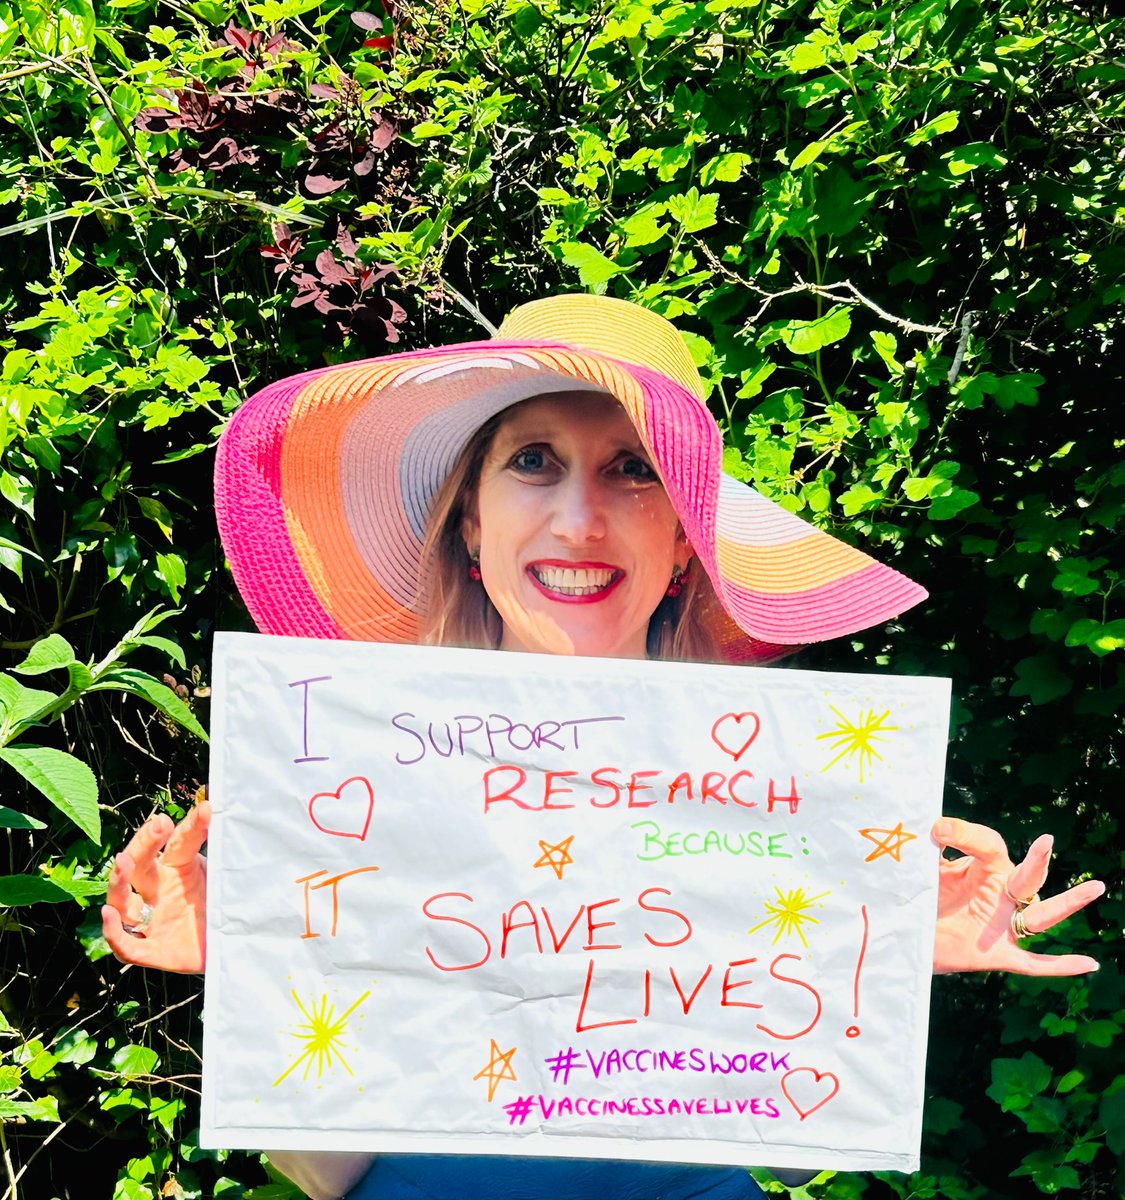 Happy Clinical Trials Day!
#ClinicalTrialsDay 

I support research because it saves lives! 

#vaccineswork 
#vaccinessavelives